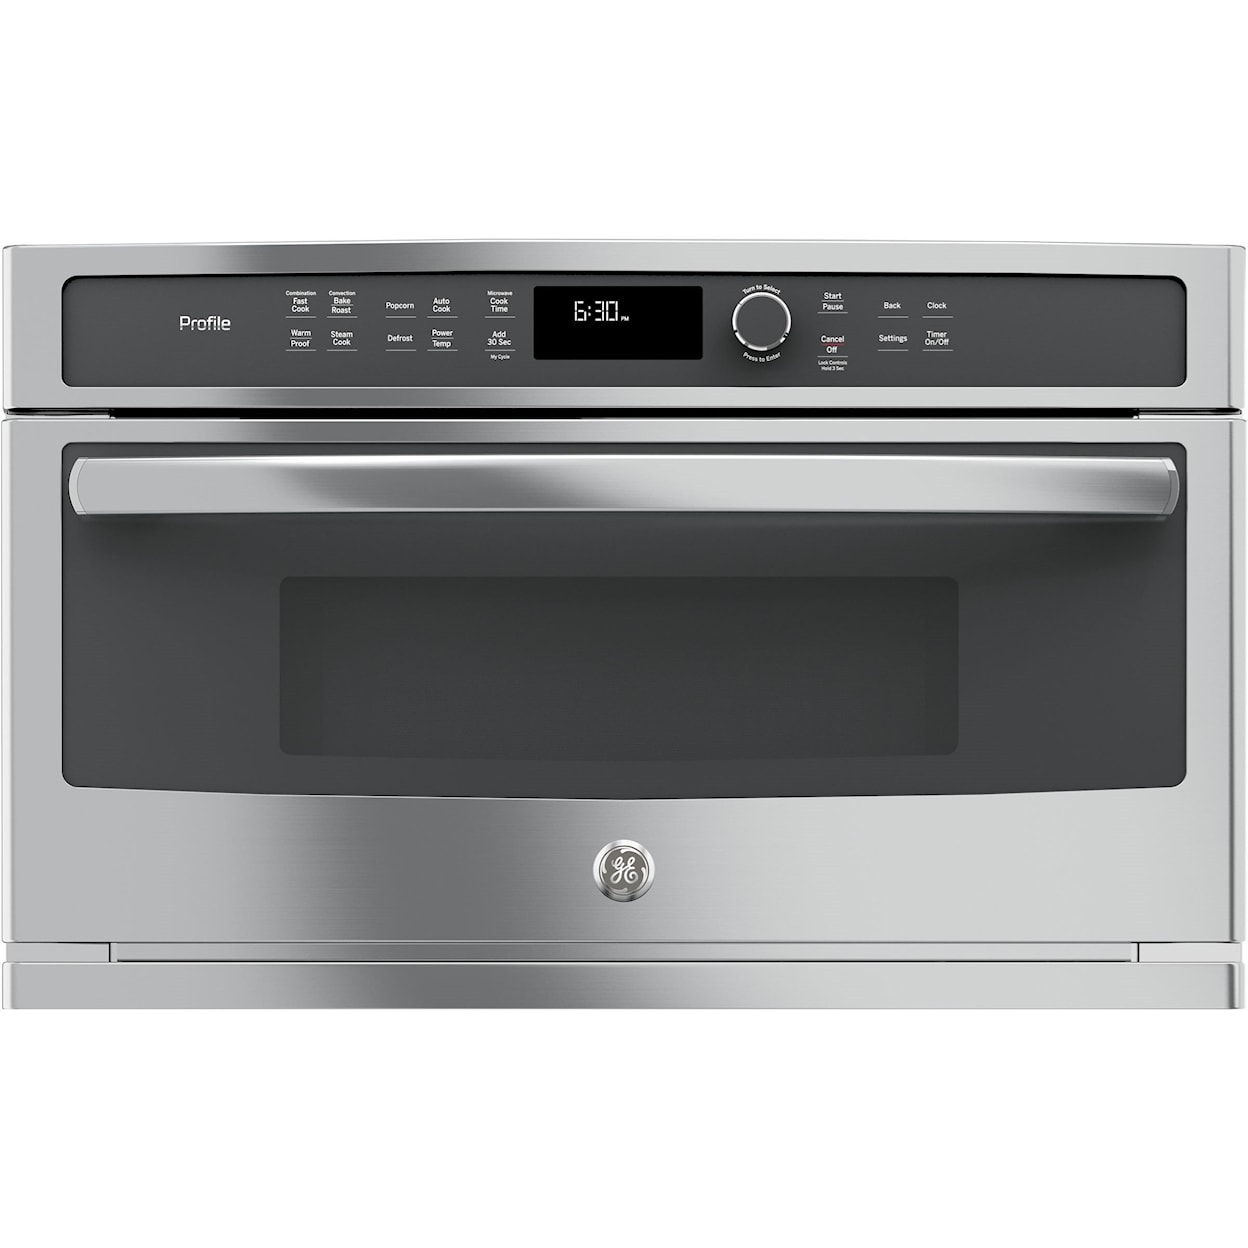 GE Appliances GE Microwaves Profile™ Built-In Microwave/Convection Oven